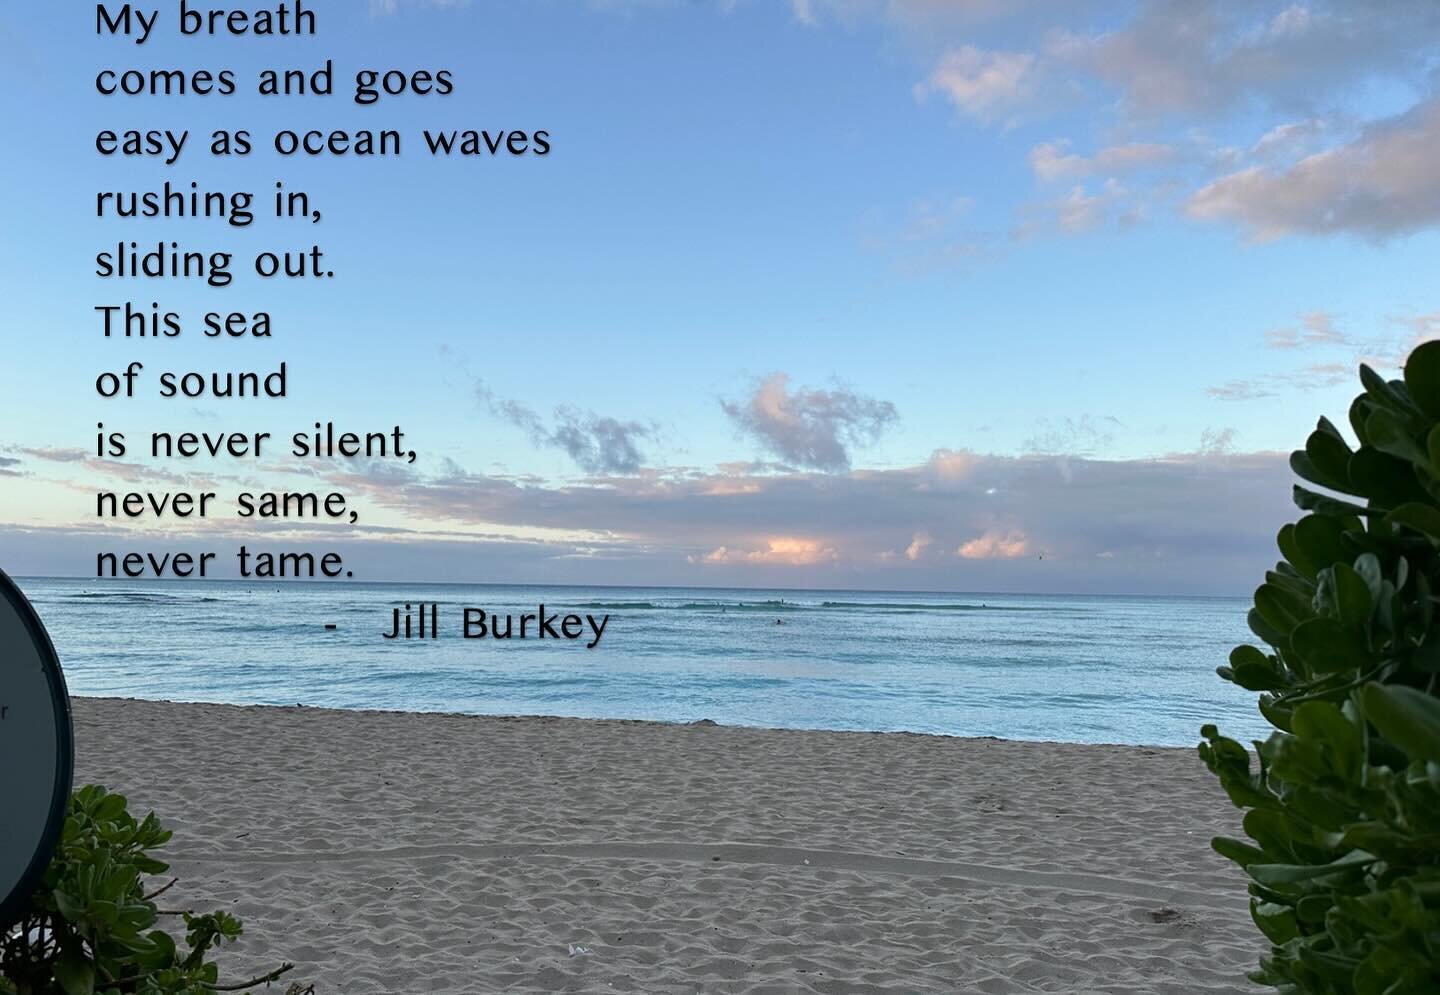 My breath 
comes and goes 
easy as ocean waves 
rushing in,
sliding out.
This sea 
of sound
is never silent,
never same,
never tame.

-&nbsp;&nbsp;&nbsp;&nbsp;&nbsp;&nbsp; Jill Burkey

Here are a few lines inspired by the ocean and a wonderful yoga a